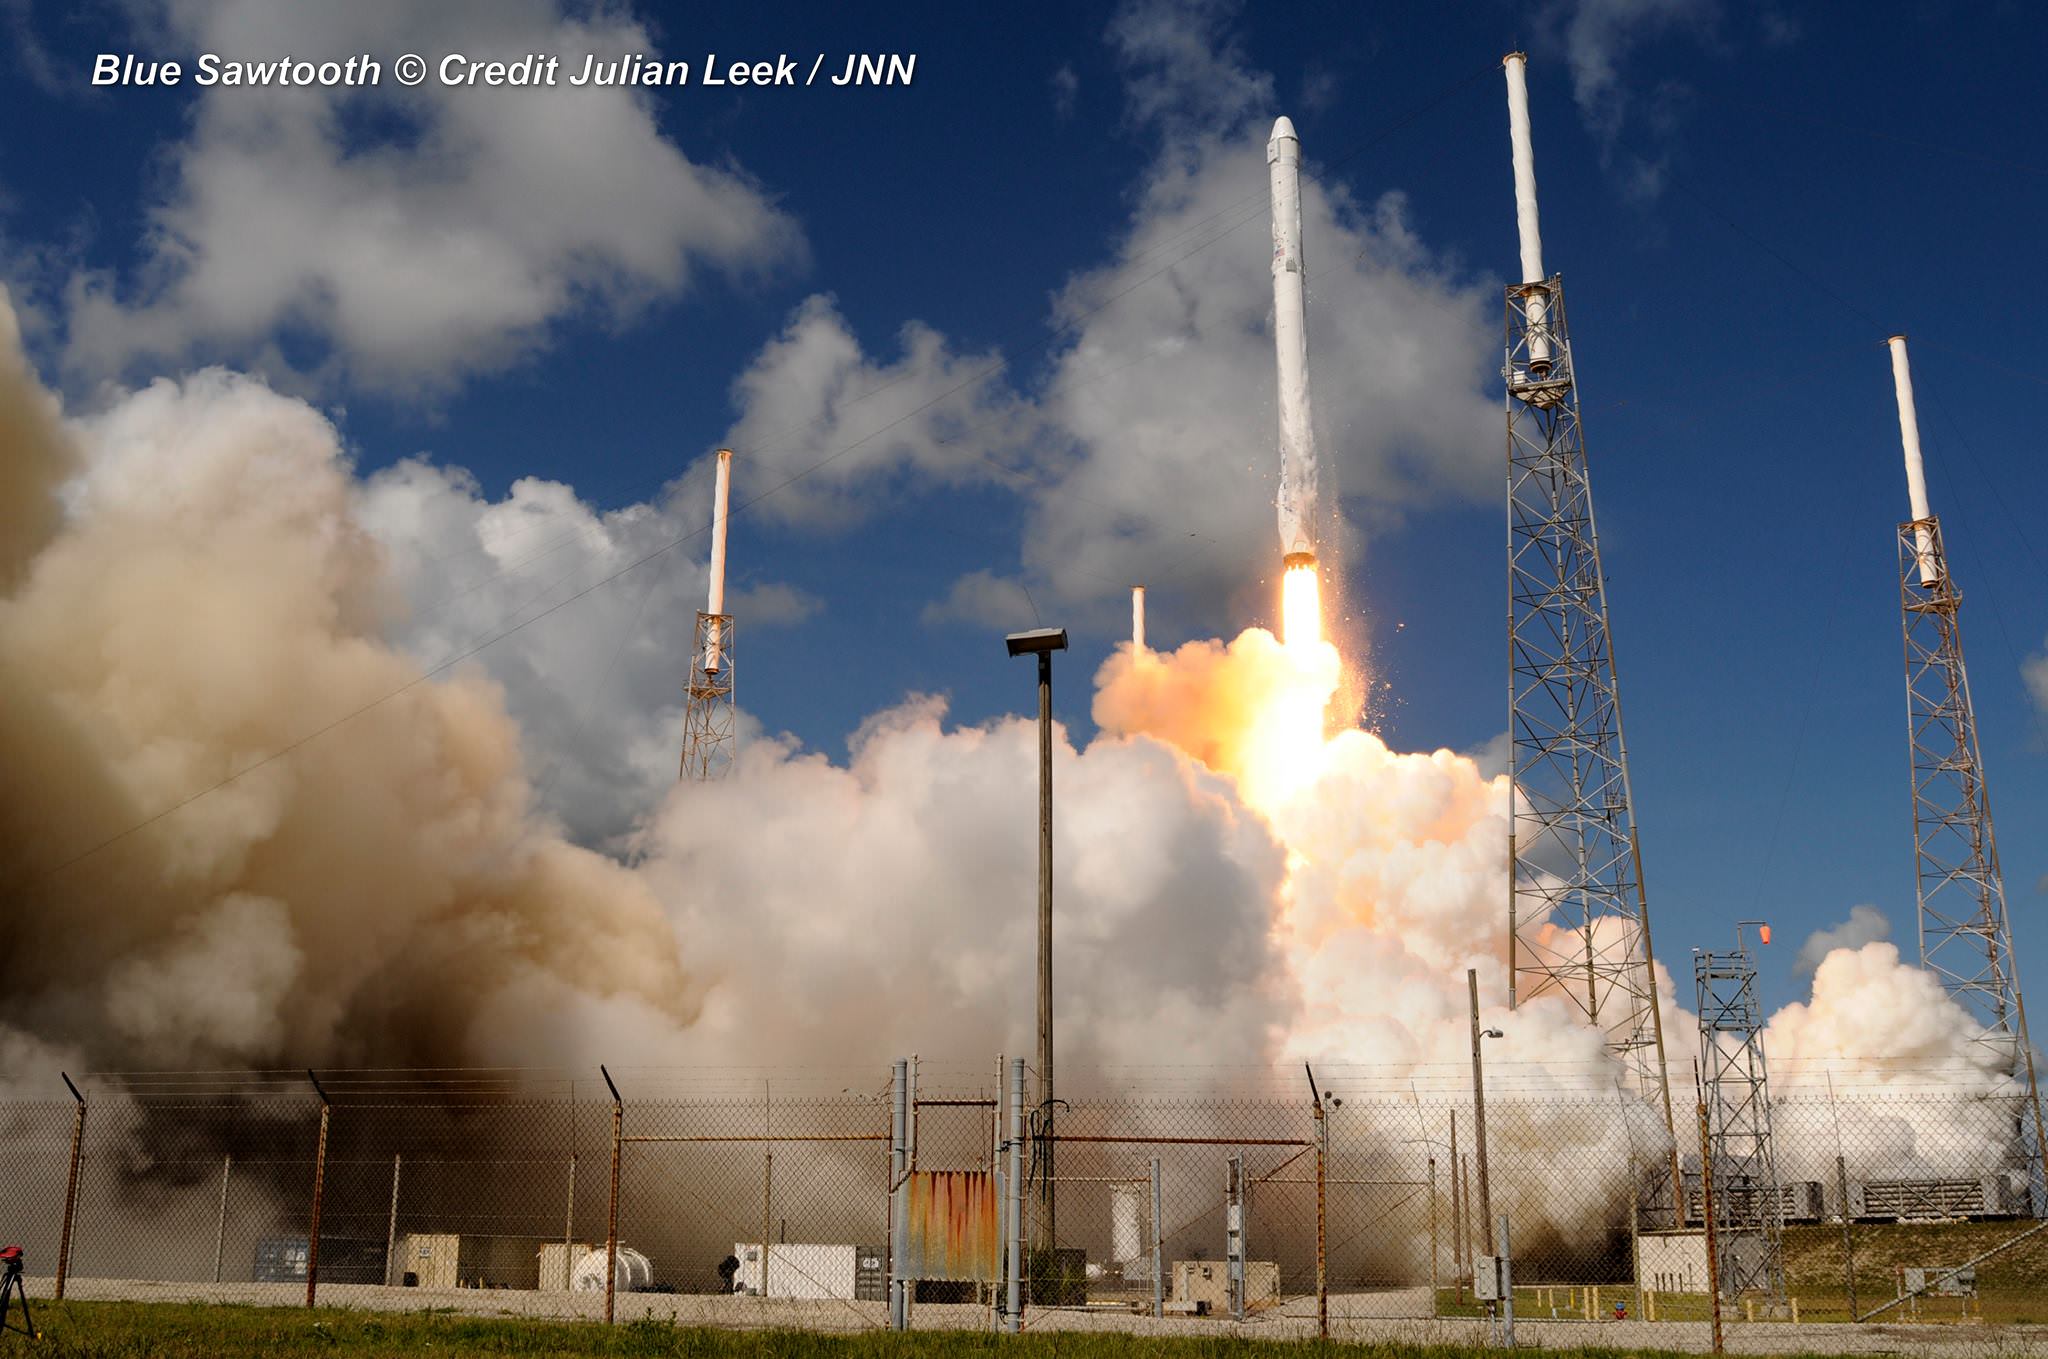 SpaceX Falcon 9 rocket launch from Cape Canaveral, Florida, on June 28, 2015. Credit: Julian Leek